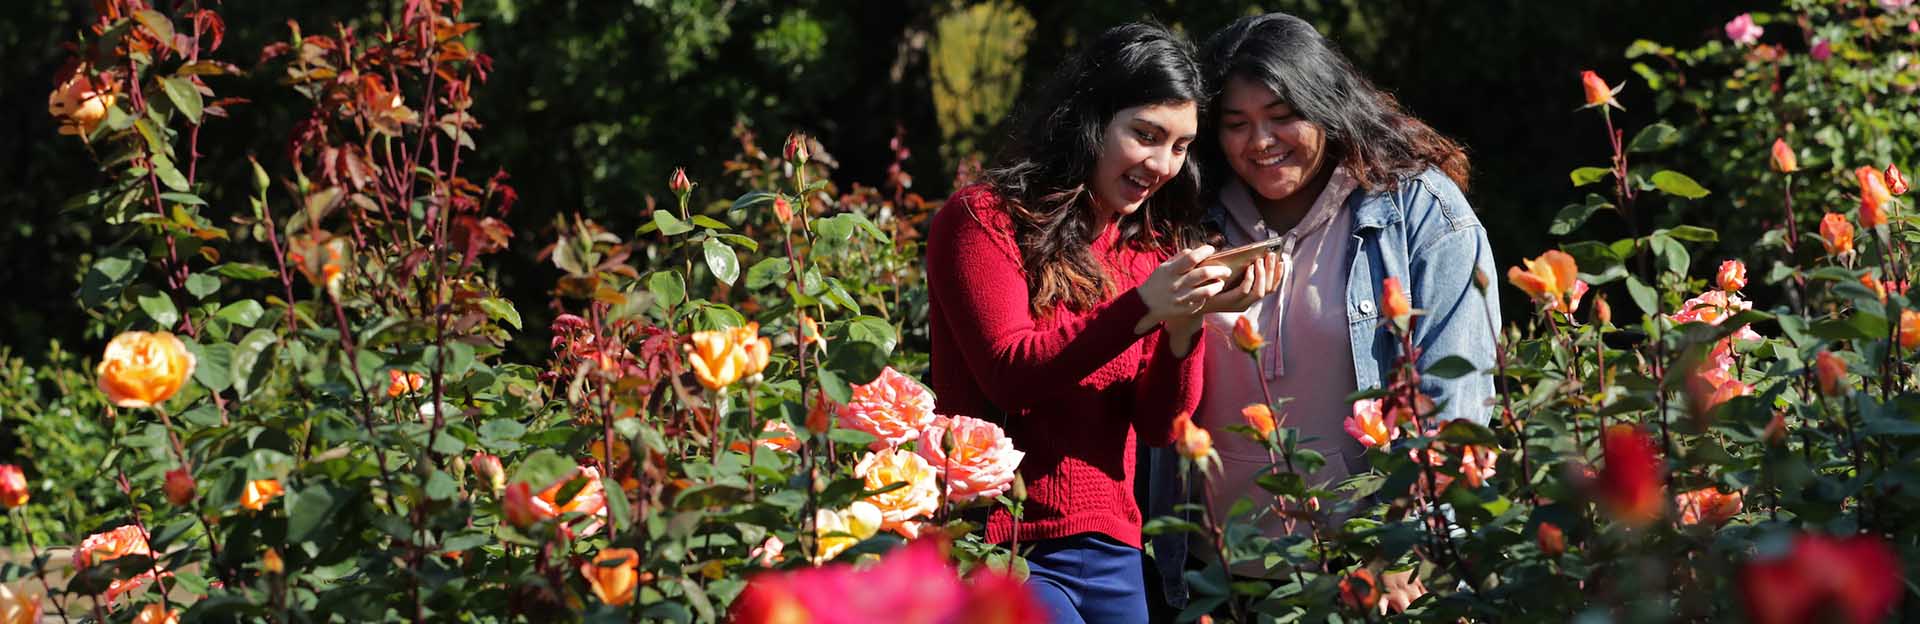 UC Riverside Botanic Gardens - two female students with cameras (c) UCR / Stan Lim